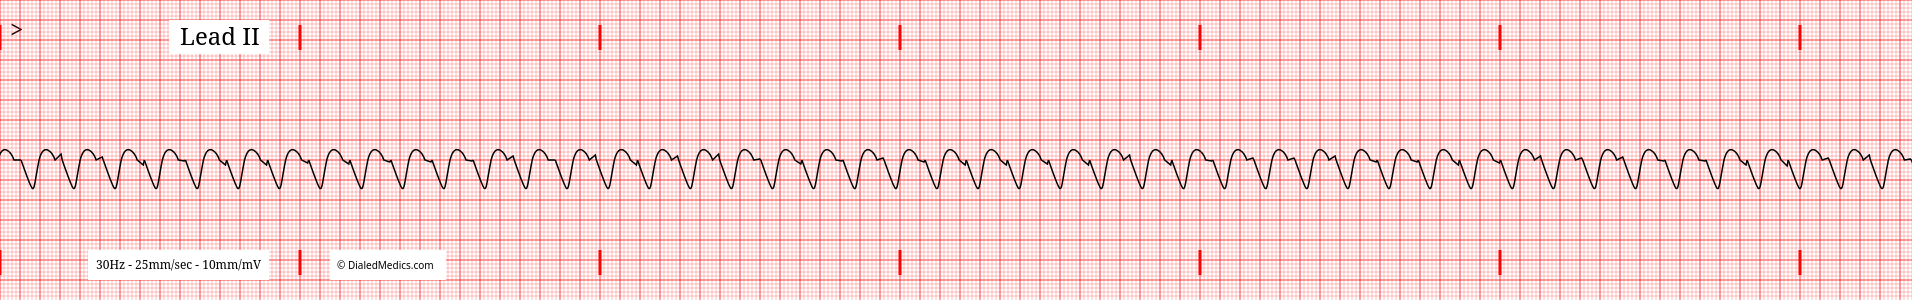 VT ECG tracing with a rate of 146bpm.